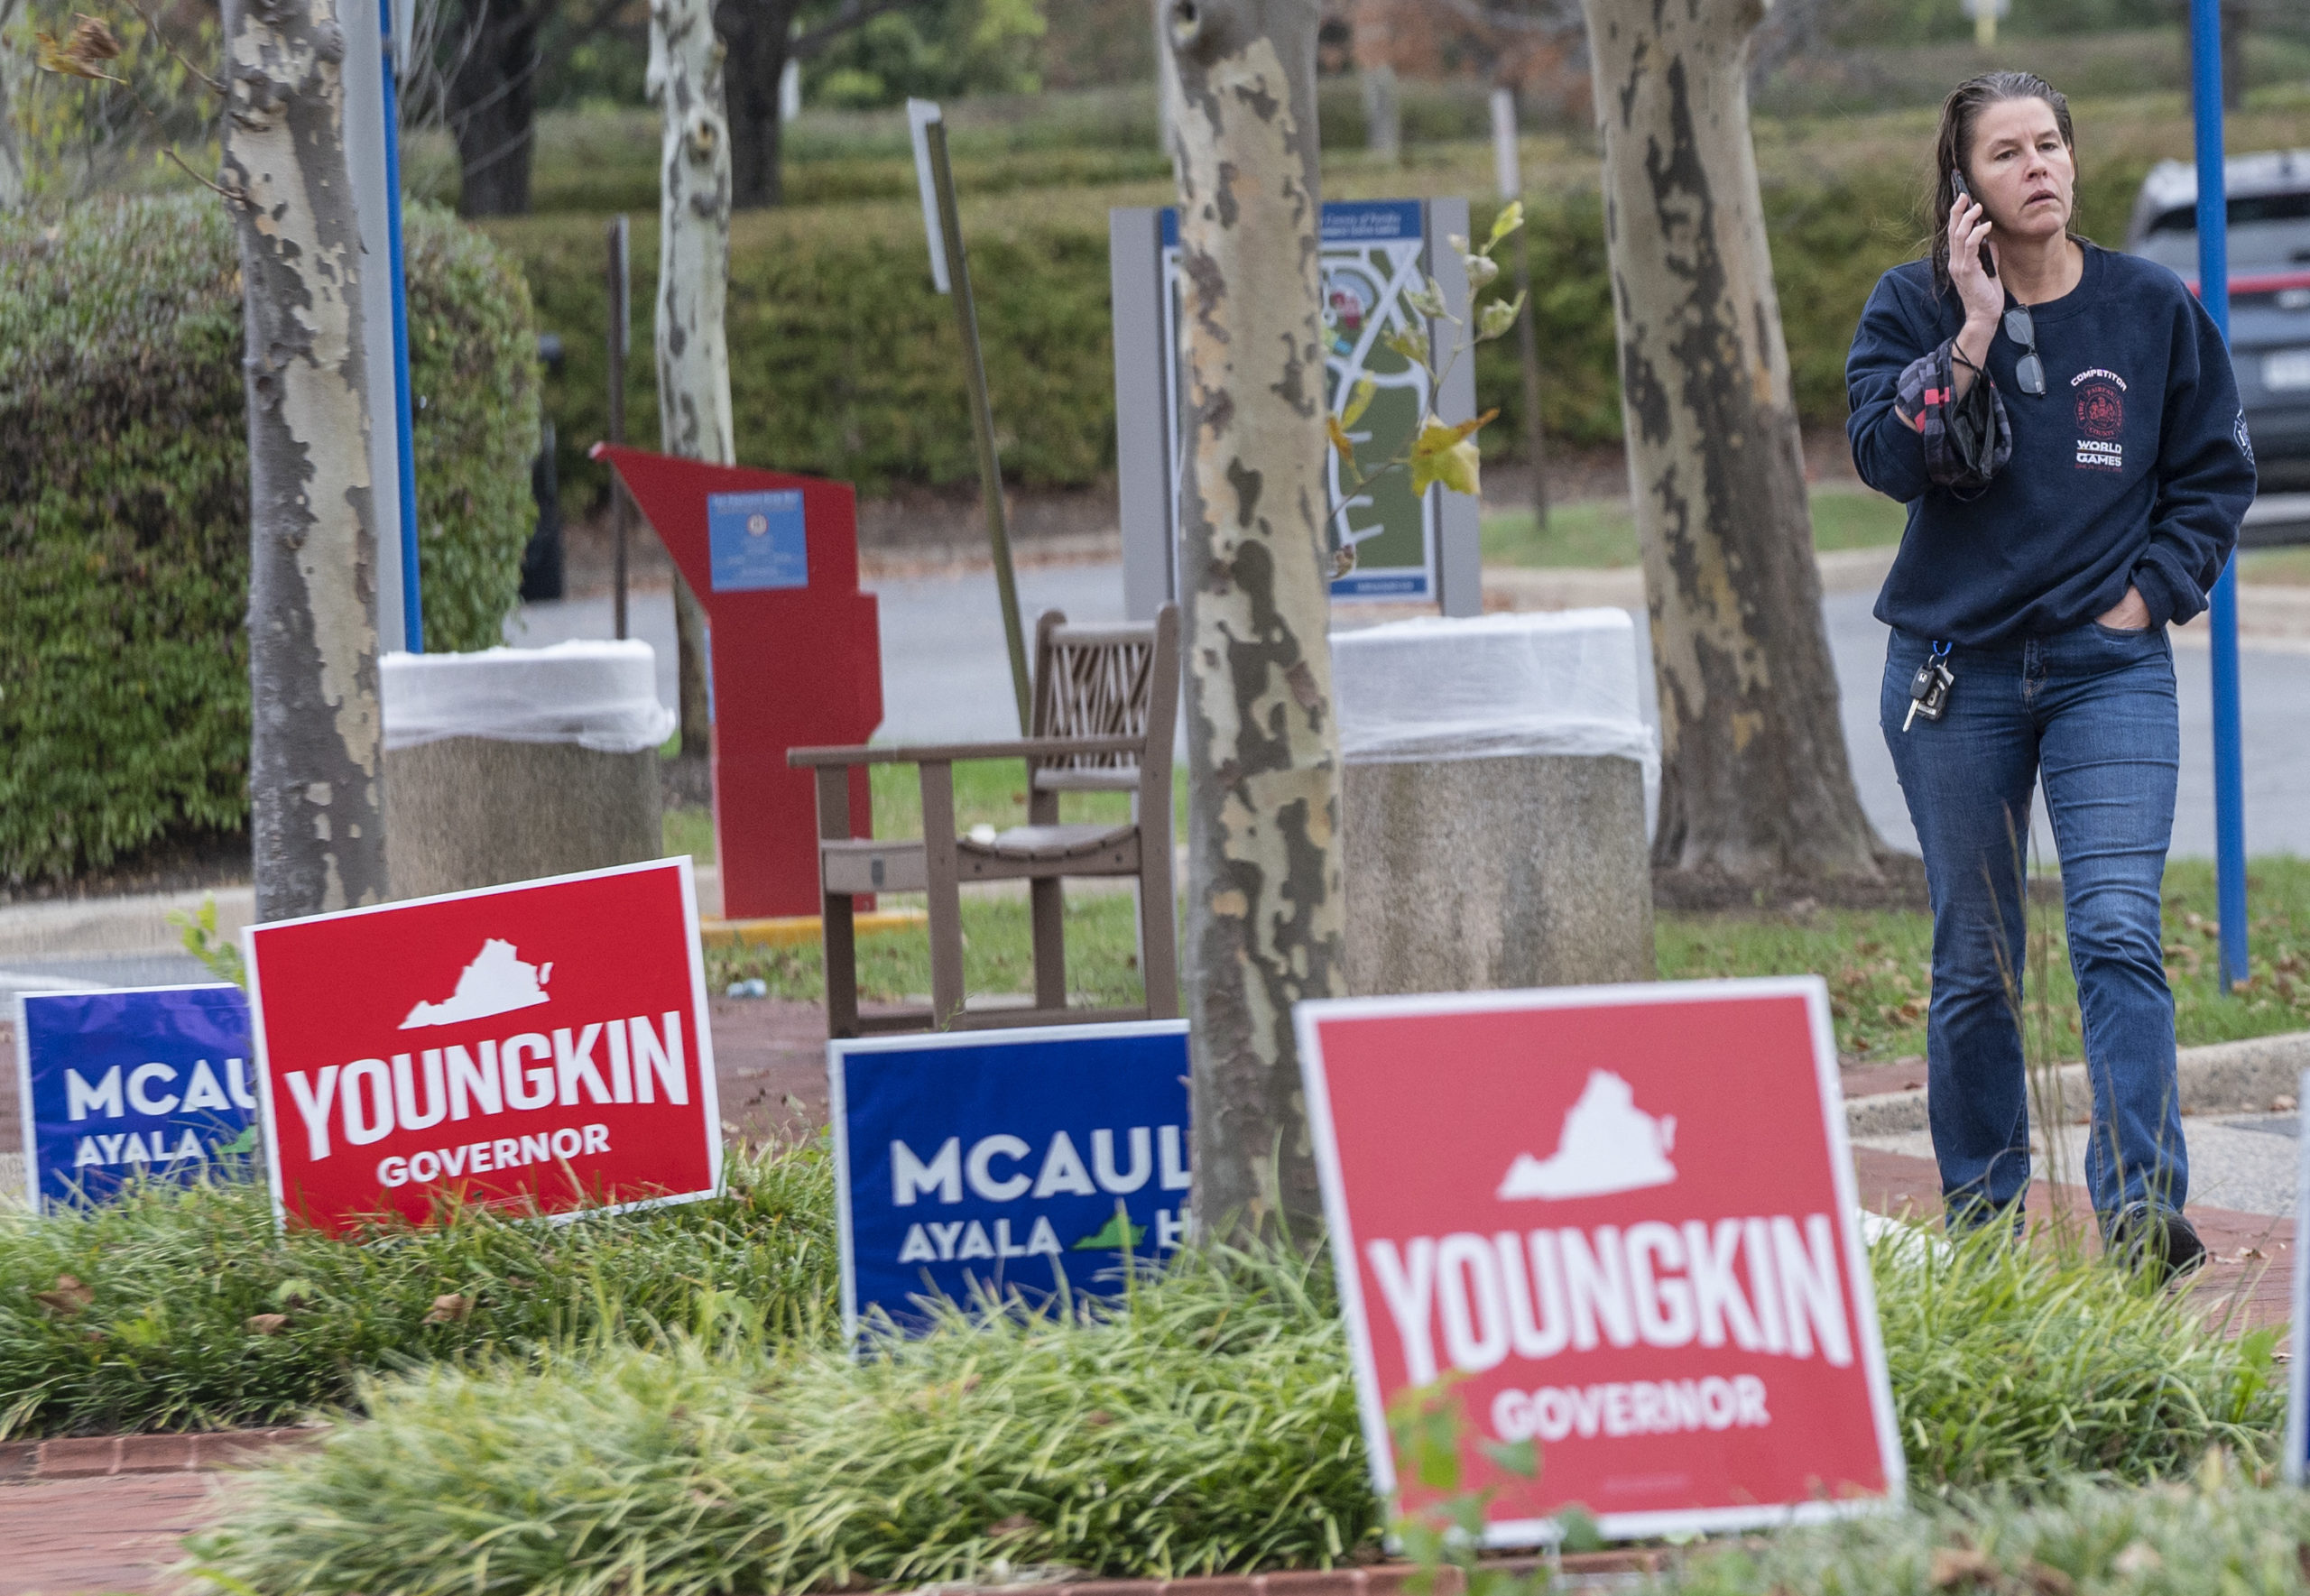 A voter walks past election signs as she walks to the Fairfax County Government Center polling location on election day in Fairfax, Virginia on November 2, 2021. (Photo by ANDREW CABALLERO-REYNOLDS/AFP via Getty Images)